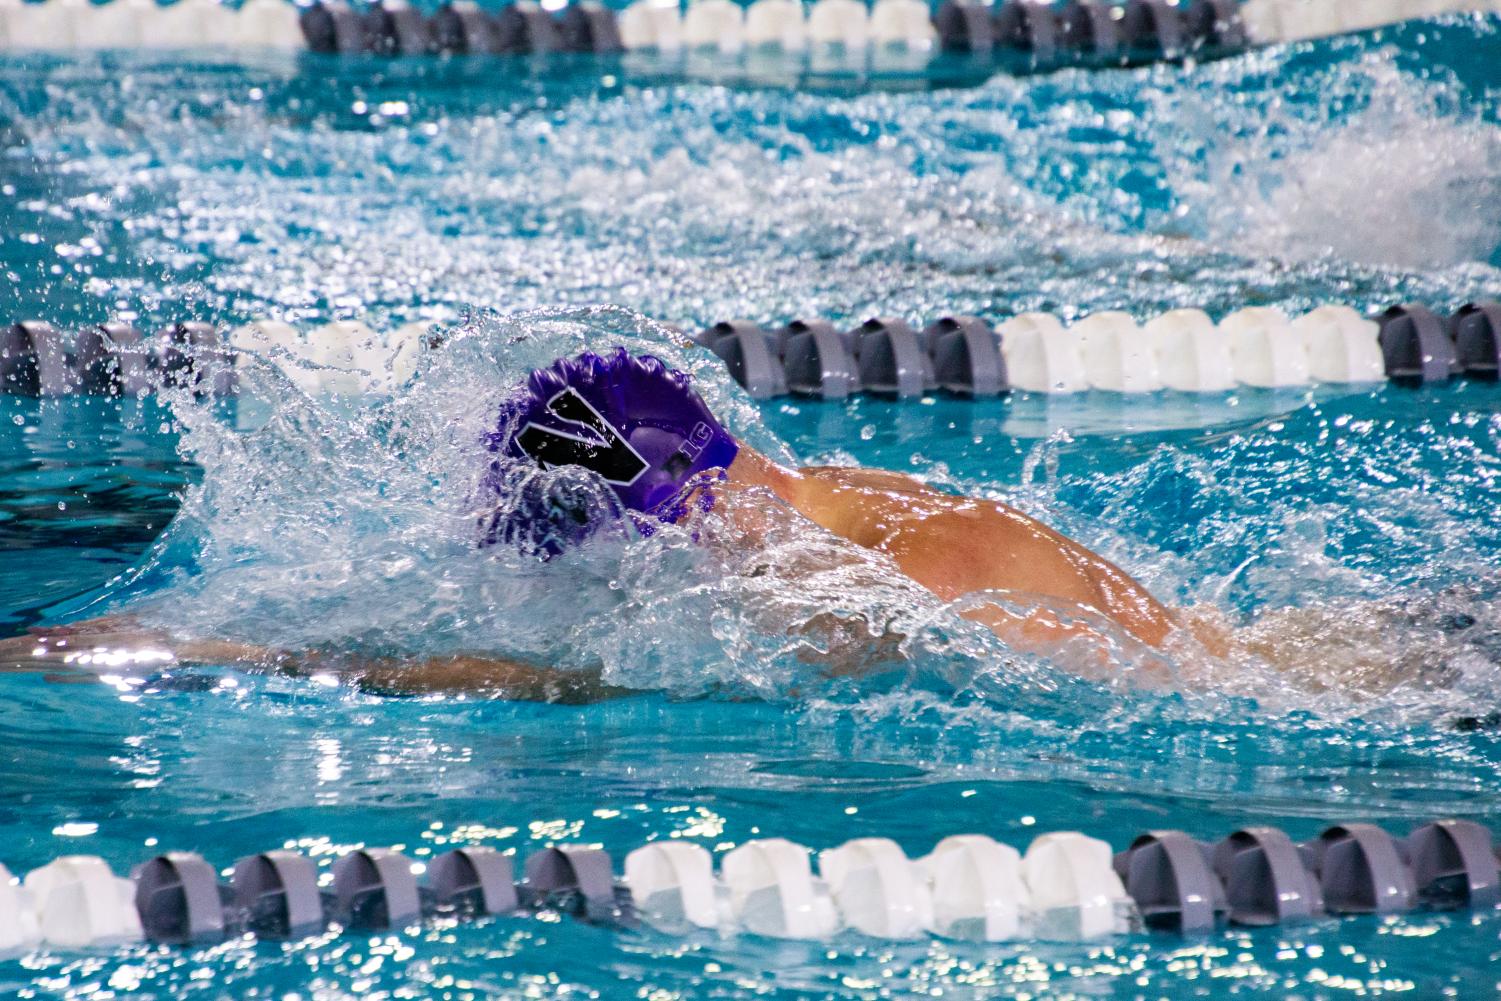 A purple cap is visible as water splashes around the swimmer.